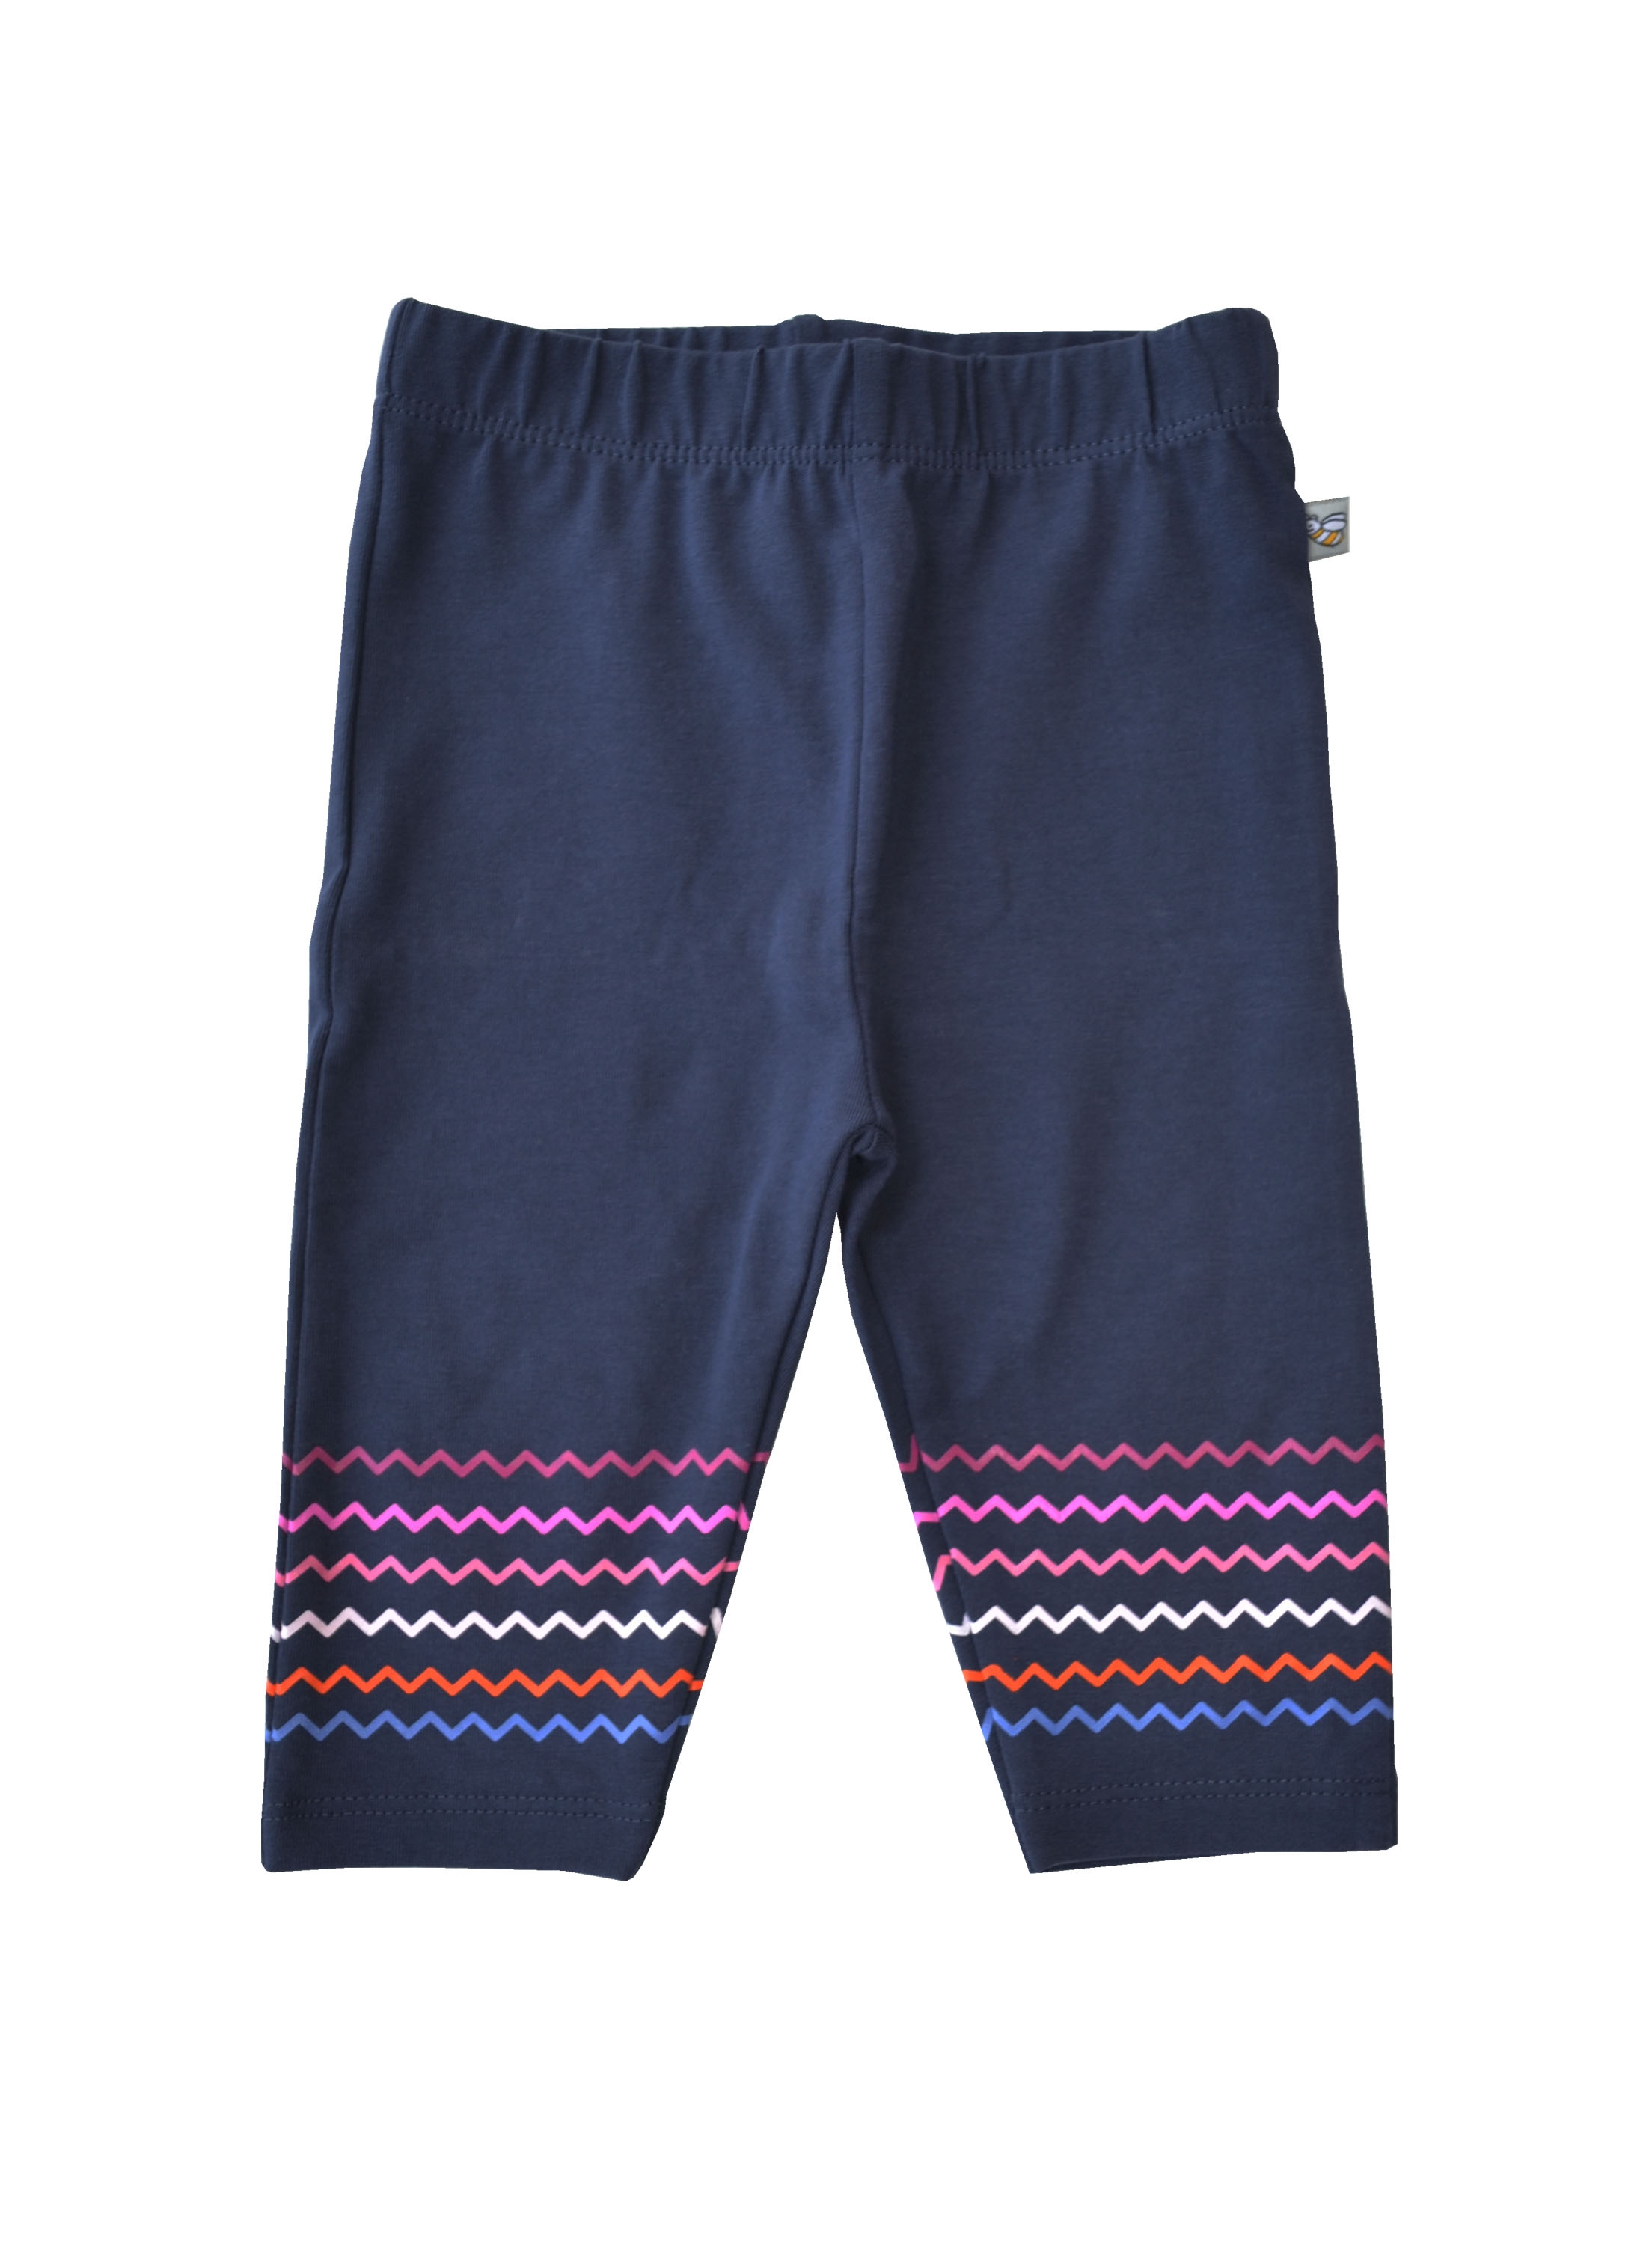 Babeez | Girls Navy Legging with Wave print at bottom (95%Cotton 5%Elasthan Jersey) undefined